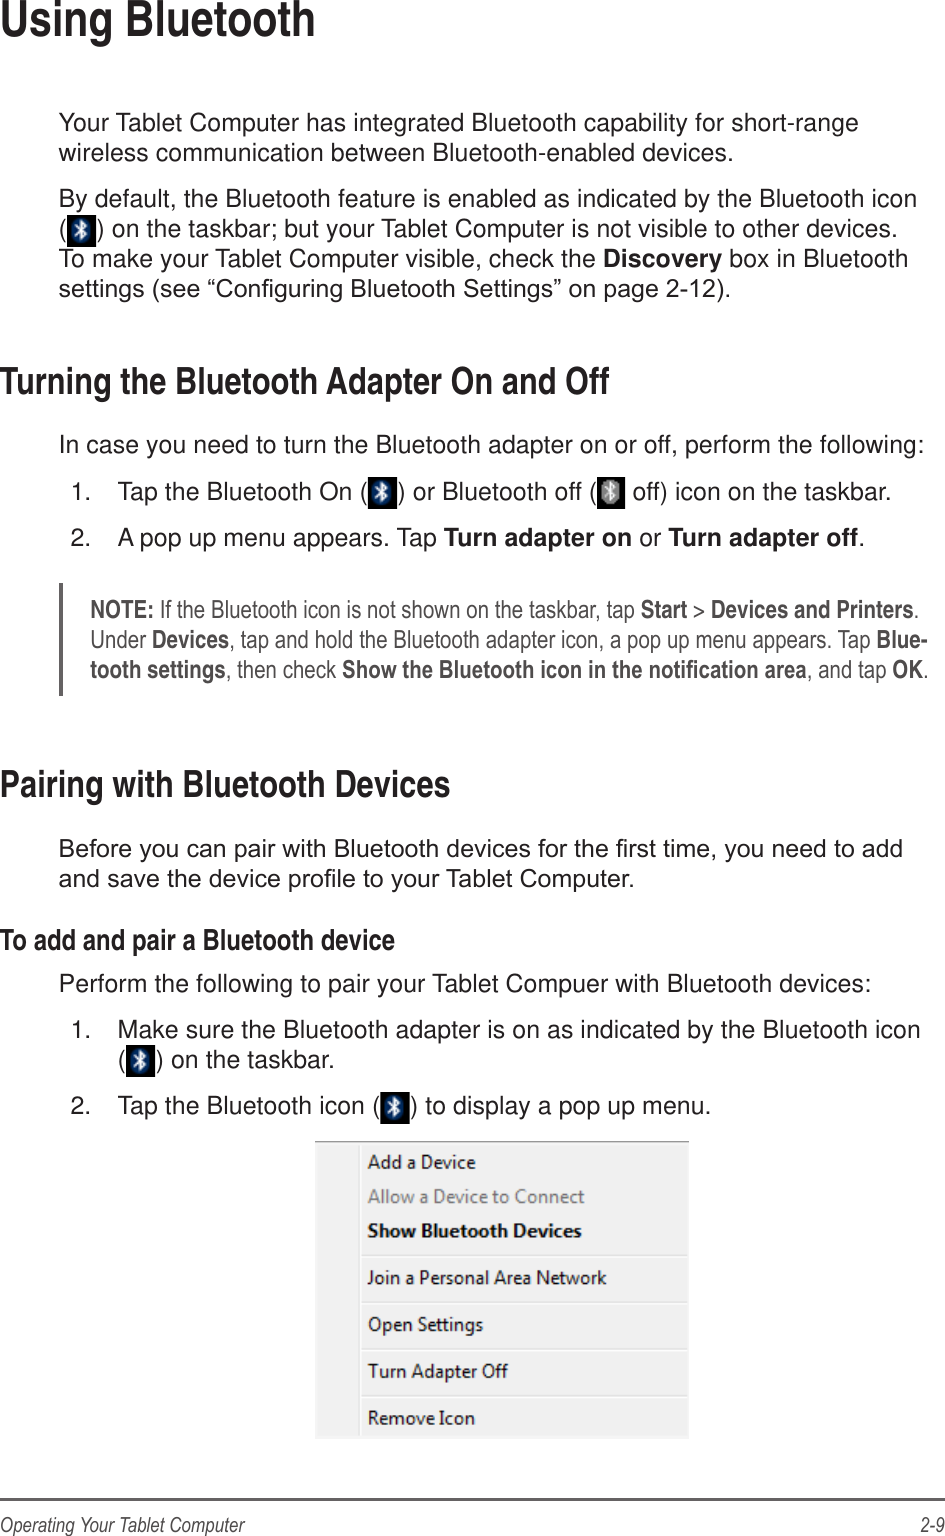 2-9Operating Your Tablet ComputerUsing BluetoothYour Tablet Computer has integrated Bluetooth capability for short-range wireless communication between Bluetooth-enabled devices.By default, the Bluetooth feature is enabled as indicated by the Bluetooth icon () on the taskbar; but your Tablet Computer is not visible to other devices. To make your Tablet Computer visible, check the Discovery box in Bluetooth Turning the Bluetooth Adapter On and OffIn case you need to turn the Bluetooth adapter on or off, perform the following:1.  Tap the Bluetooth On ( ) or Bluetooth off (  off) icon on the taskbar.2.  A pop up menu appears. Tap Turn adapter on or Turn adapter off.NOTE: Start &gt; Devices and PrintersDevicesBlue-tooth settingsOKPairing with Bluetooth DevicesTo add and pair a Bluetooth devicePerform the following to pair your Tablet Compuer with Bluetooth devices:1.  Make sure the Bluetooth adapter is on as indicated by the Bluetooth icon  () on the taskbar.2.  Tap the Bluetooth icon ( ) to display a pop up menu.